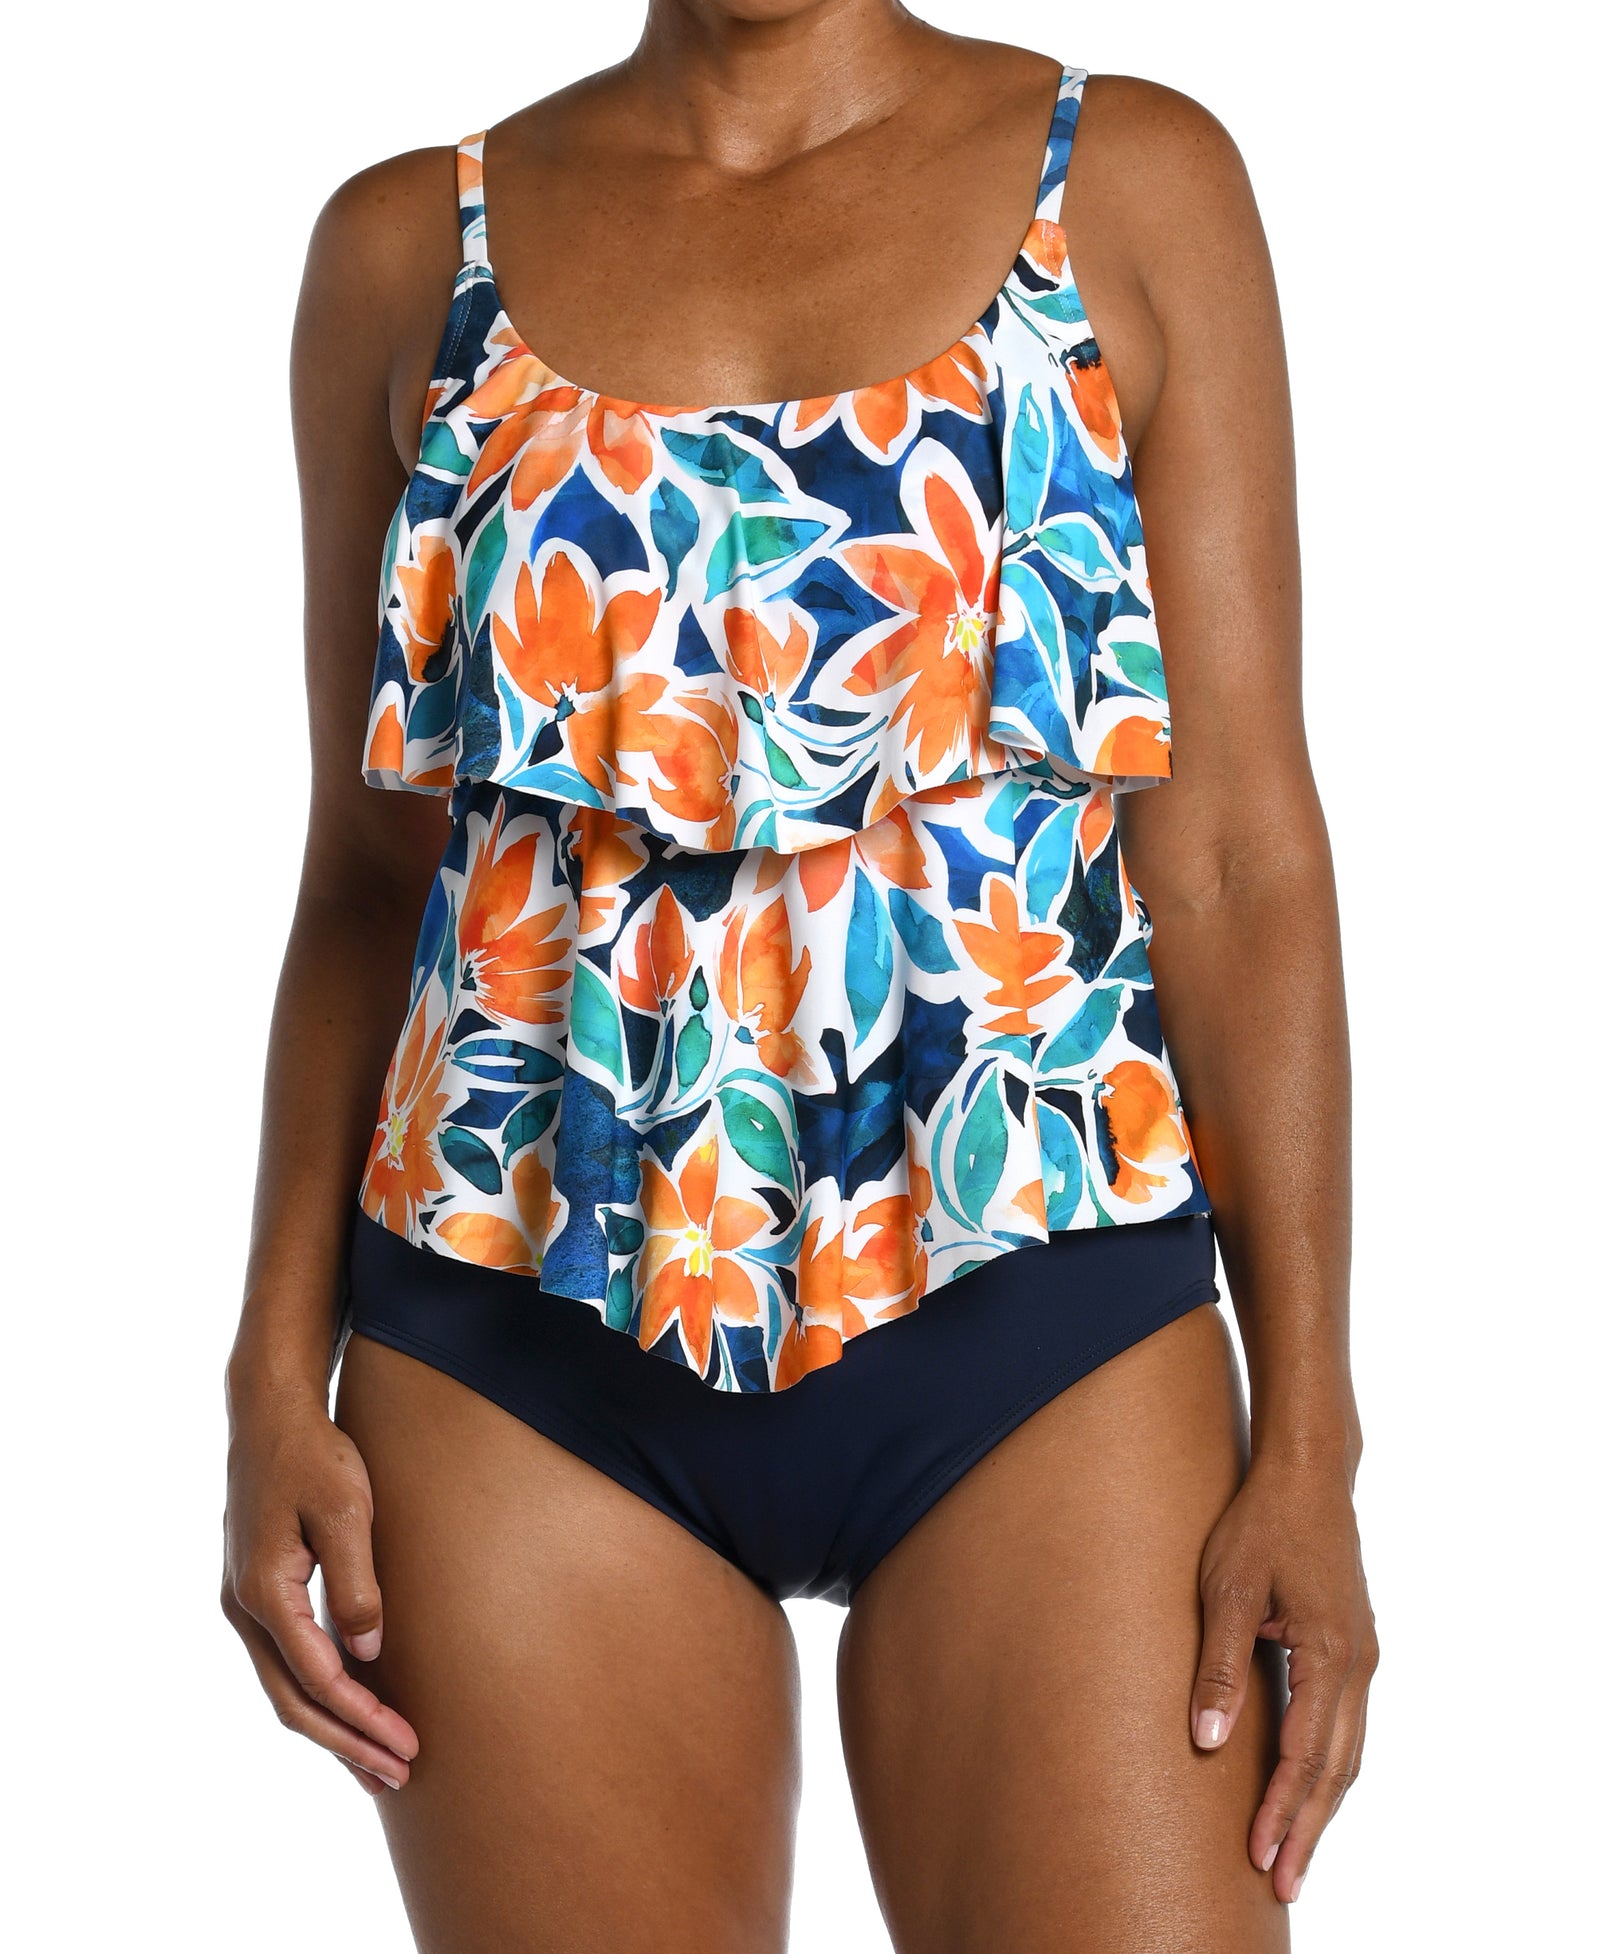 Joyful Blooms Collection  Double Tiered Tankini Top  Fabric Content: 82% Nylon/ 18% Lycra Xtra Life Elastane  Product#: MM3CA58